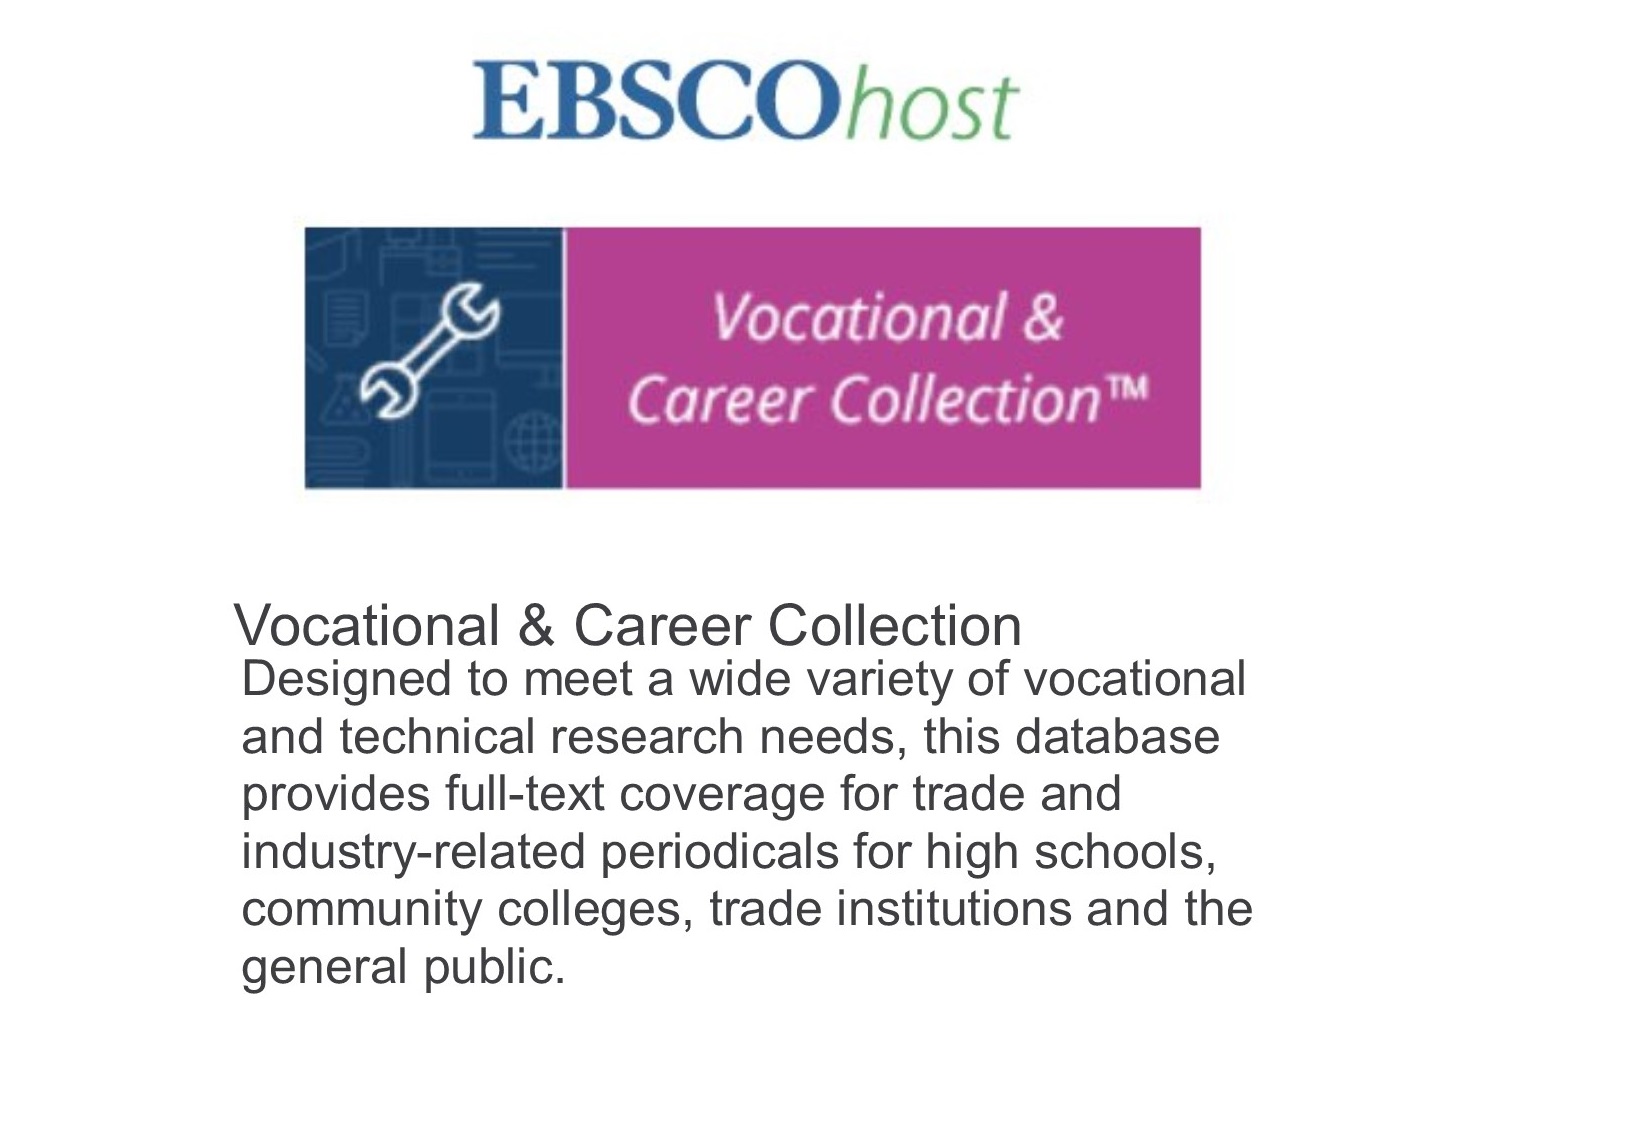 Image describing EBSCO vocational and career collection, with an embedded link to the site